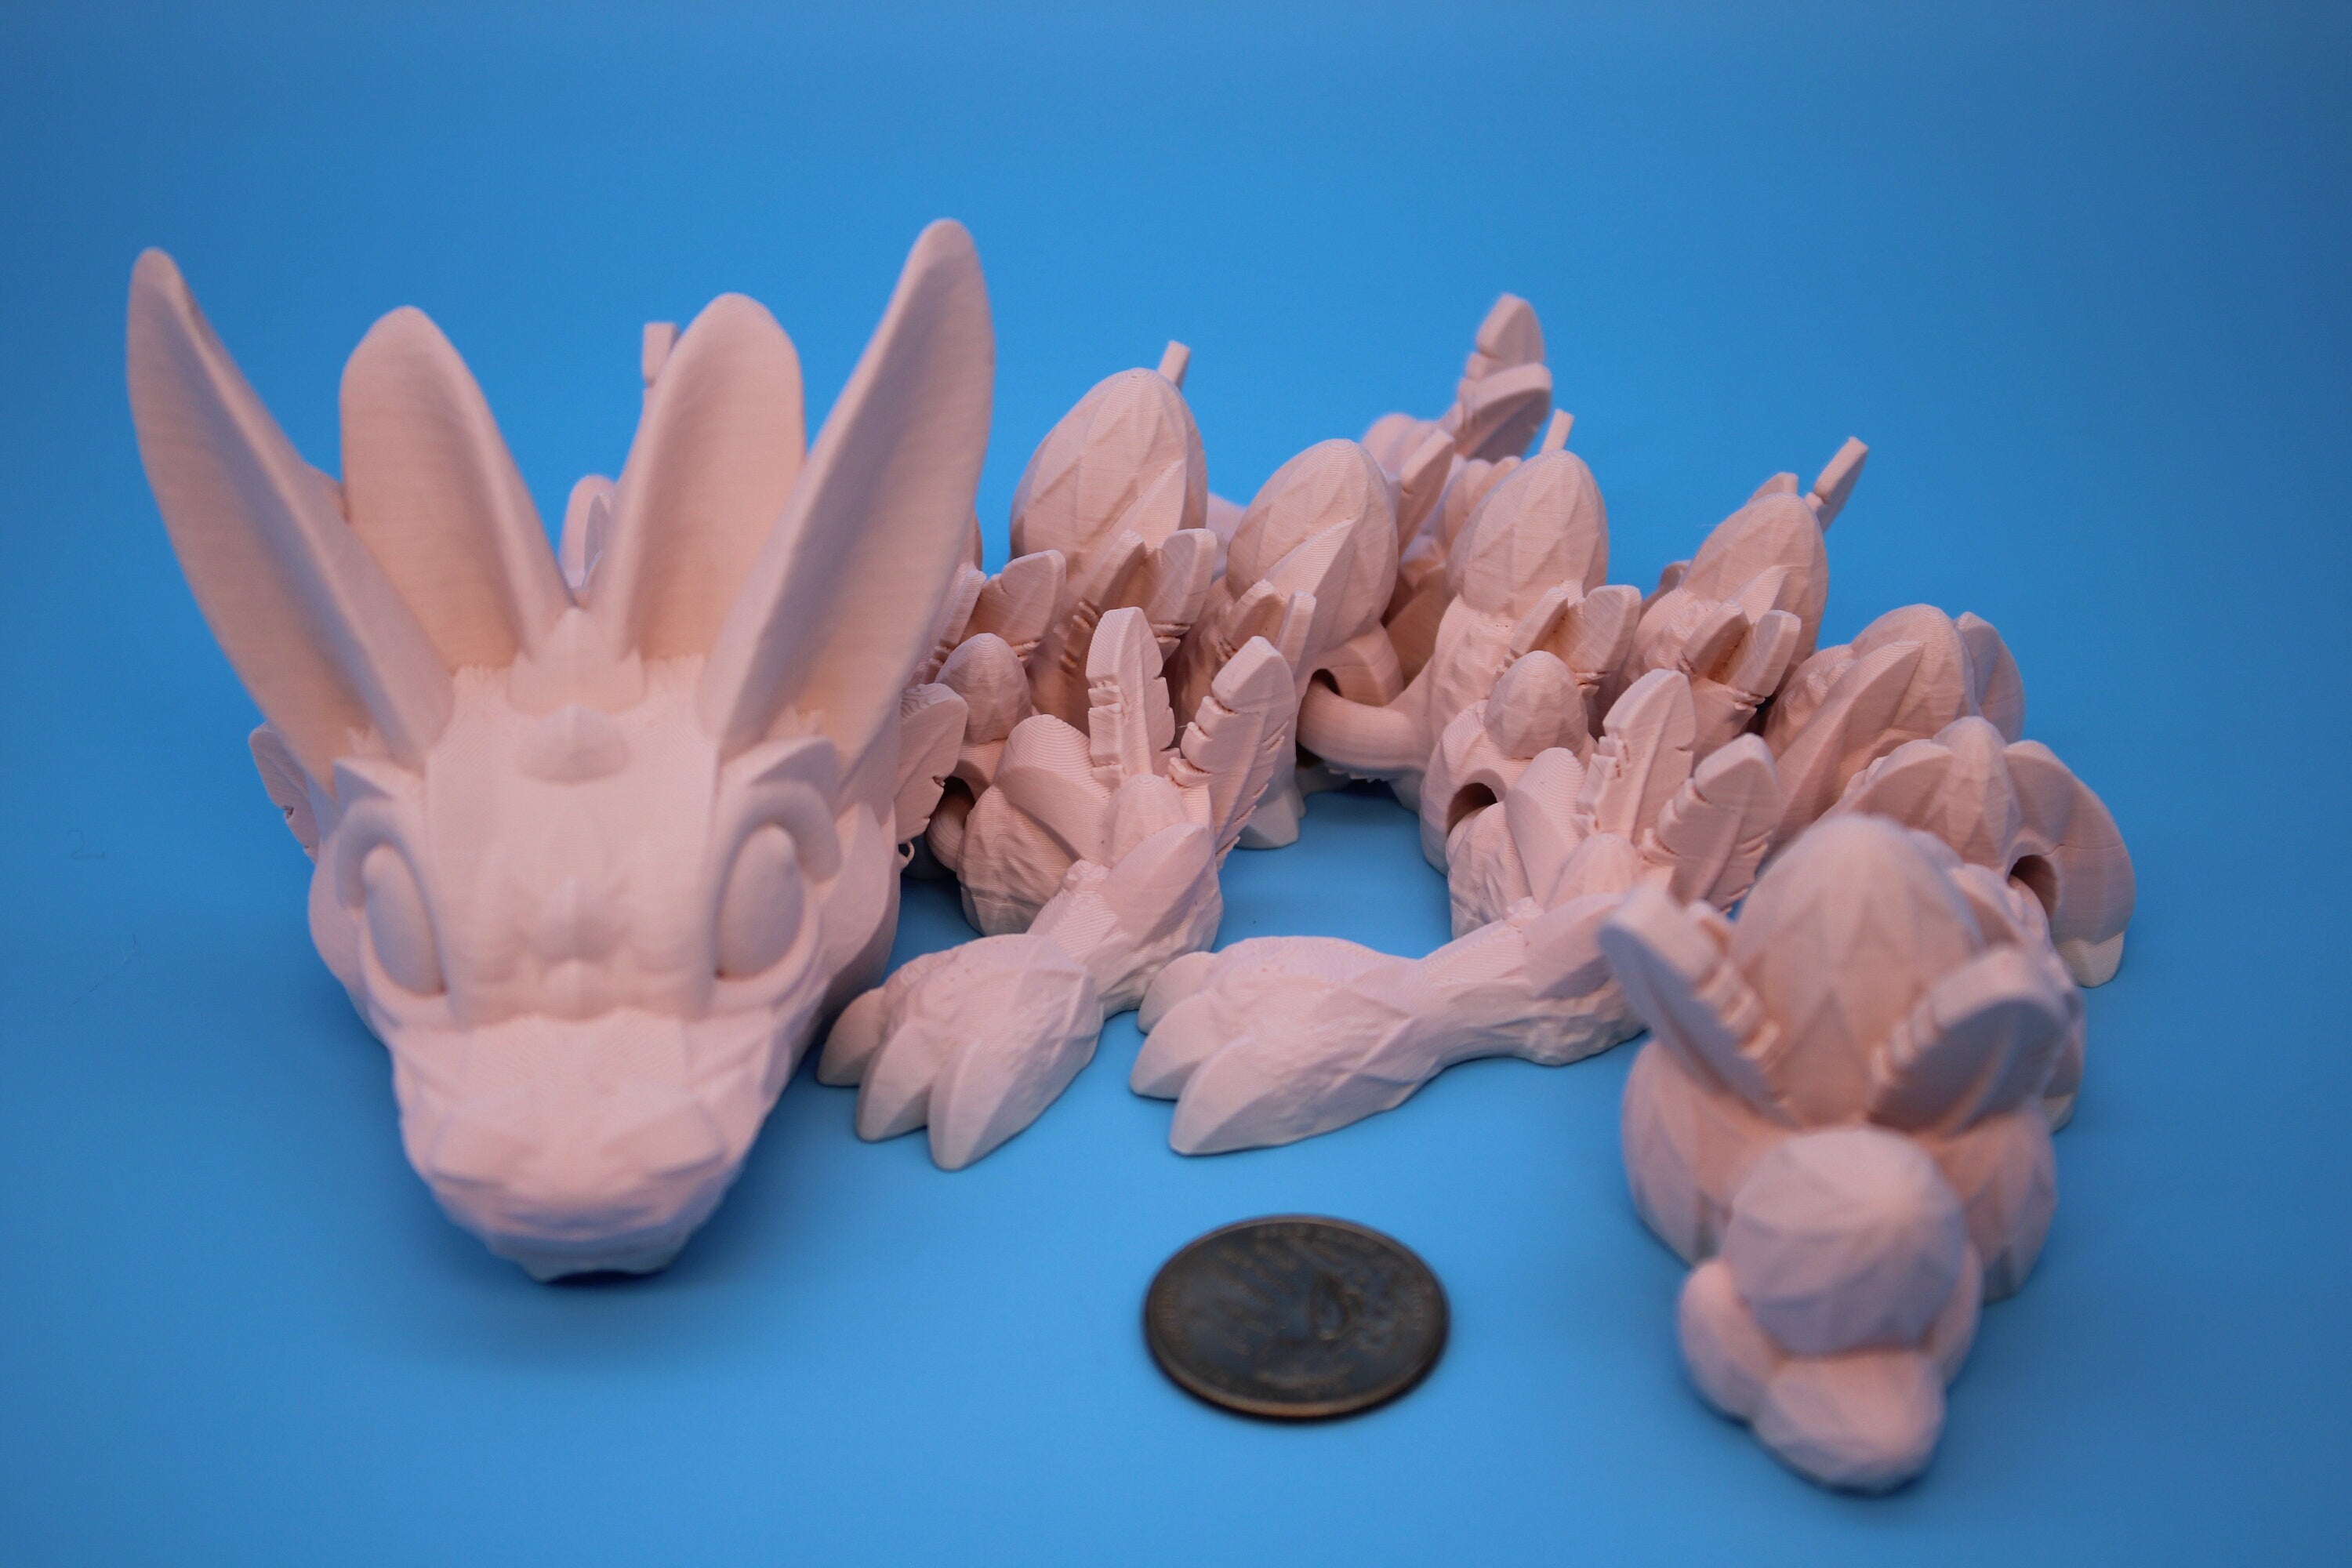 Easter Baby Dragon | 3D Printed Articulating Dragon | Flexi Toy | Adult Fidget Toy | Dragon Buddy ready for you! 12 in